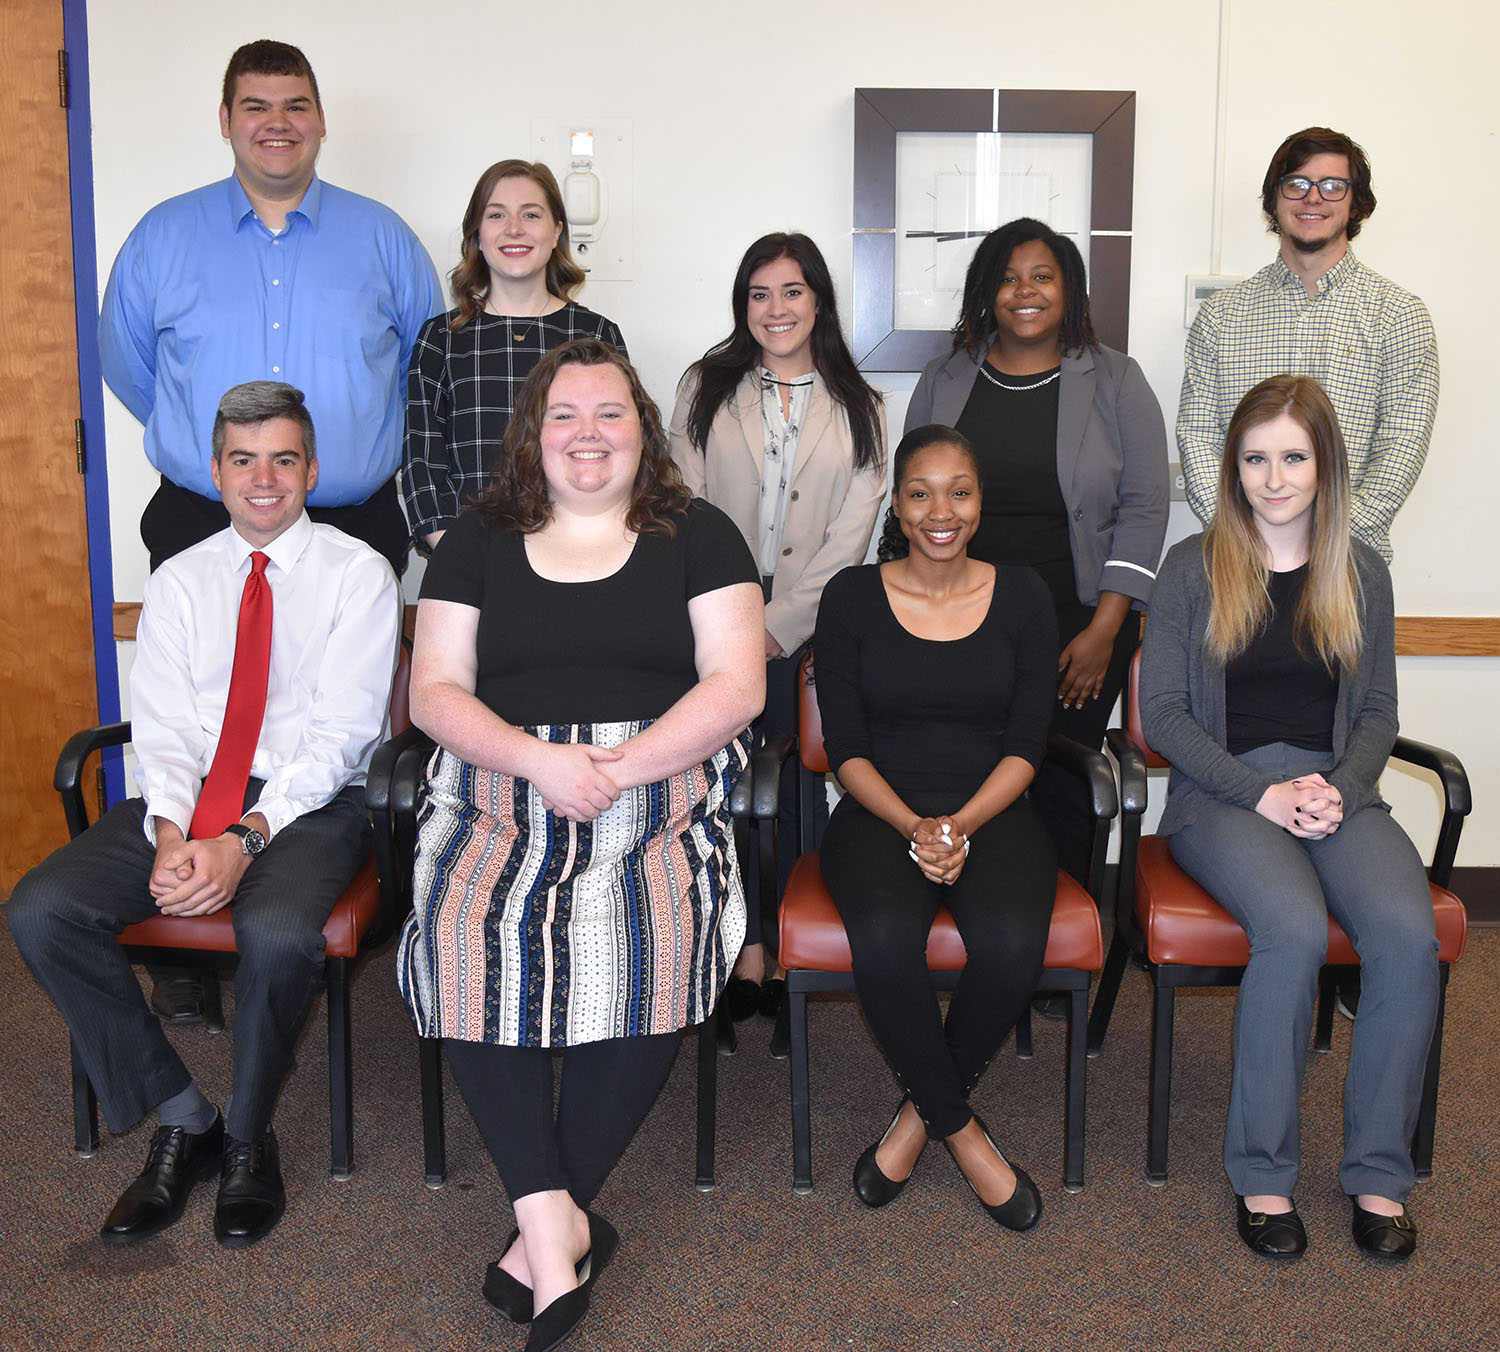 YSU students participating in the 2019 Nonprofit Leadership Summer Honors Internship Program are, from the left, front row, Jason McQuown, Amanda Paynter, Jasmine Bailey, and Laura Drake; second row, Jacob Guy, Katherine Landry, Christiana Savo, Shakeila Allen and Isaac Carrino. Missing from photo is Albert Chizmar.